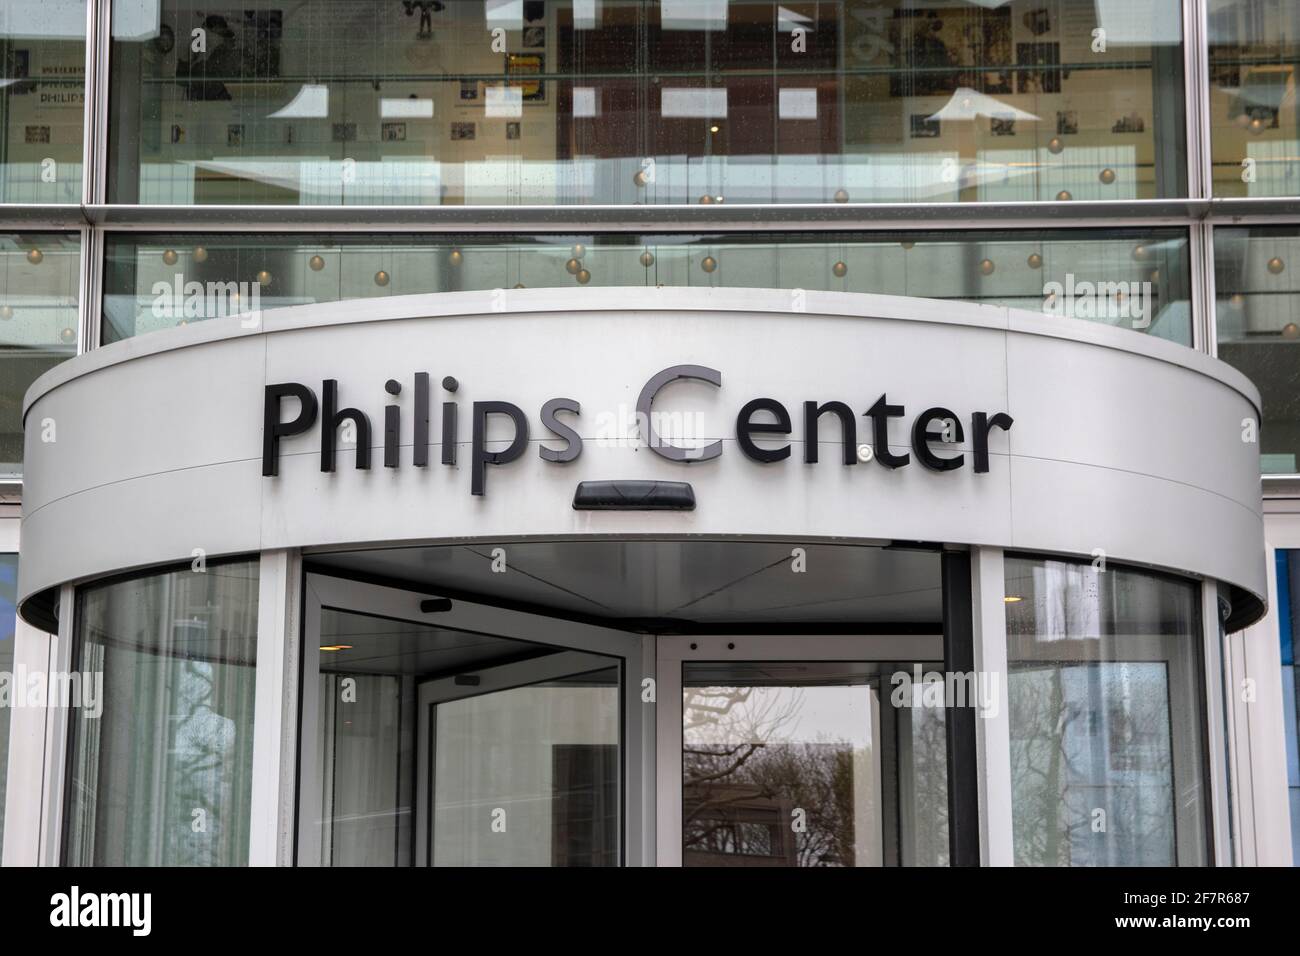 Entrance Philips Center At Amsterdam The Netherlands 19-3-2020 Stock Photo